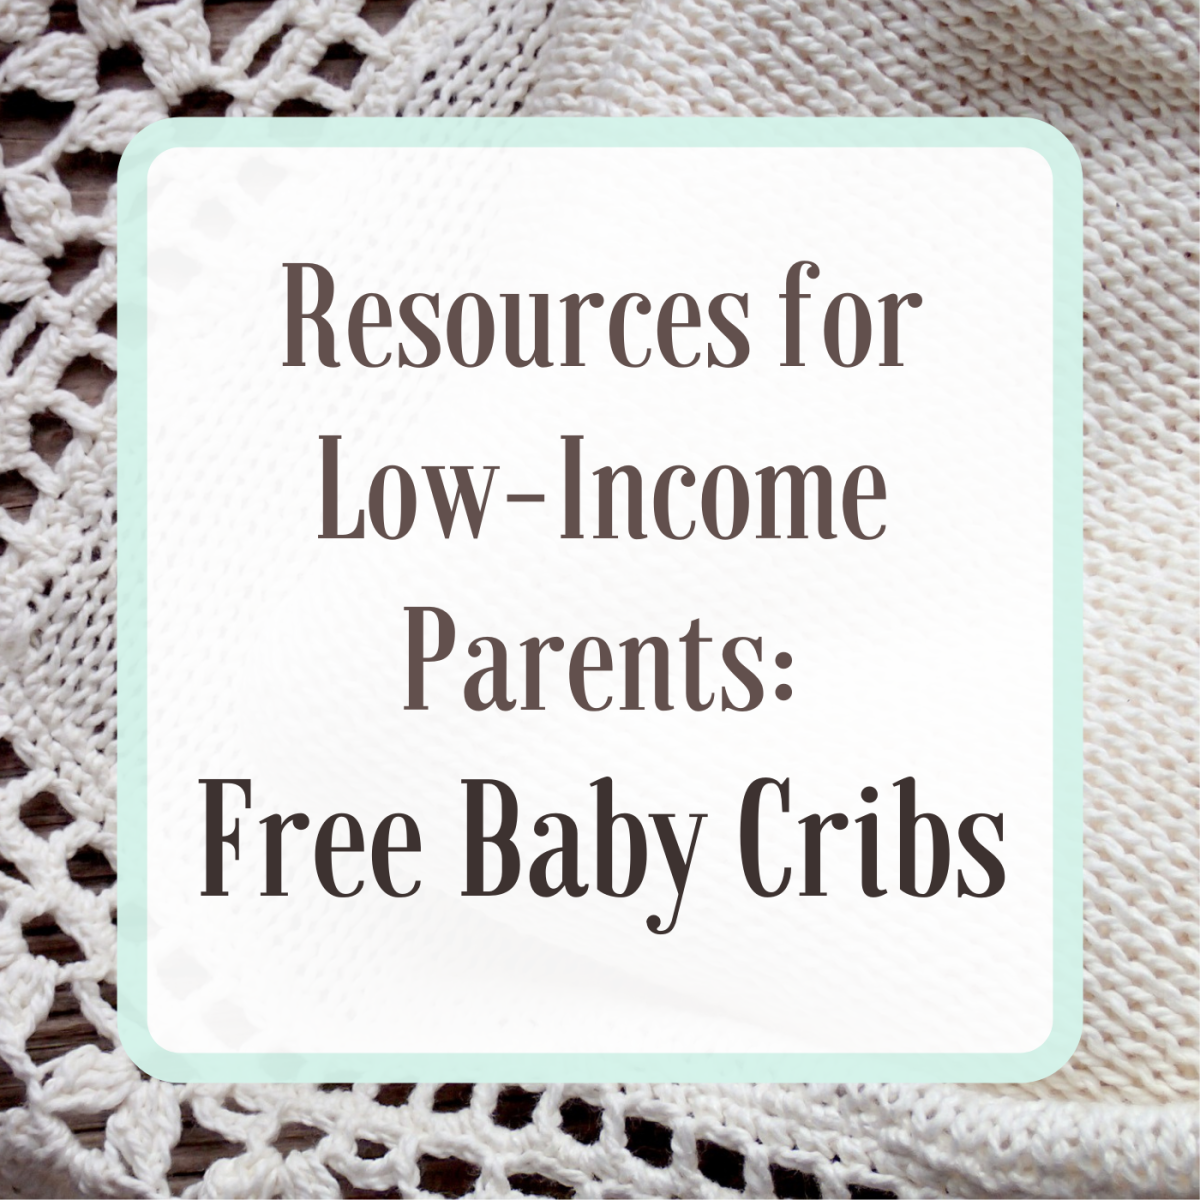 Many non-profits and health agencies across the United States offer free cribs to qualifying low-income parents, often in partnership with Cribs for Kids.